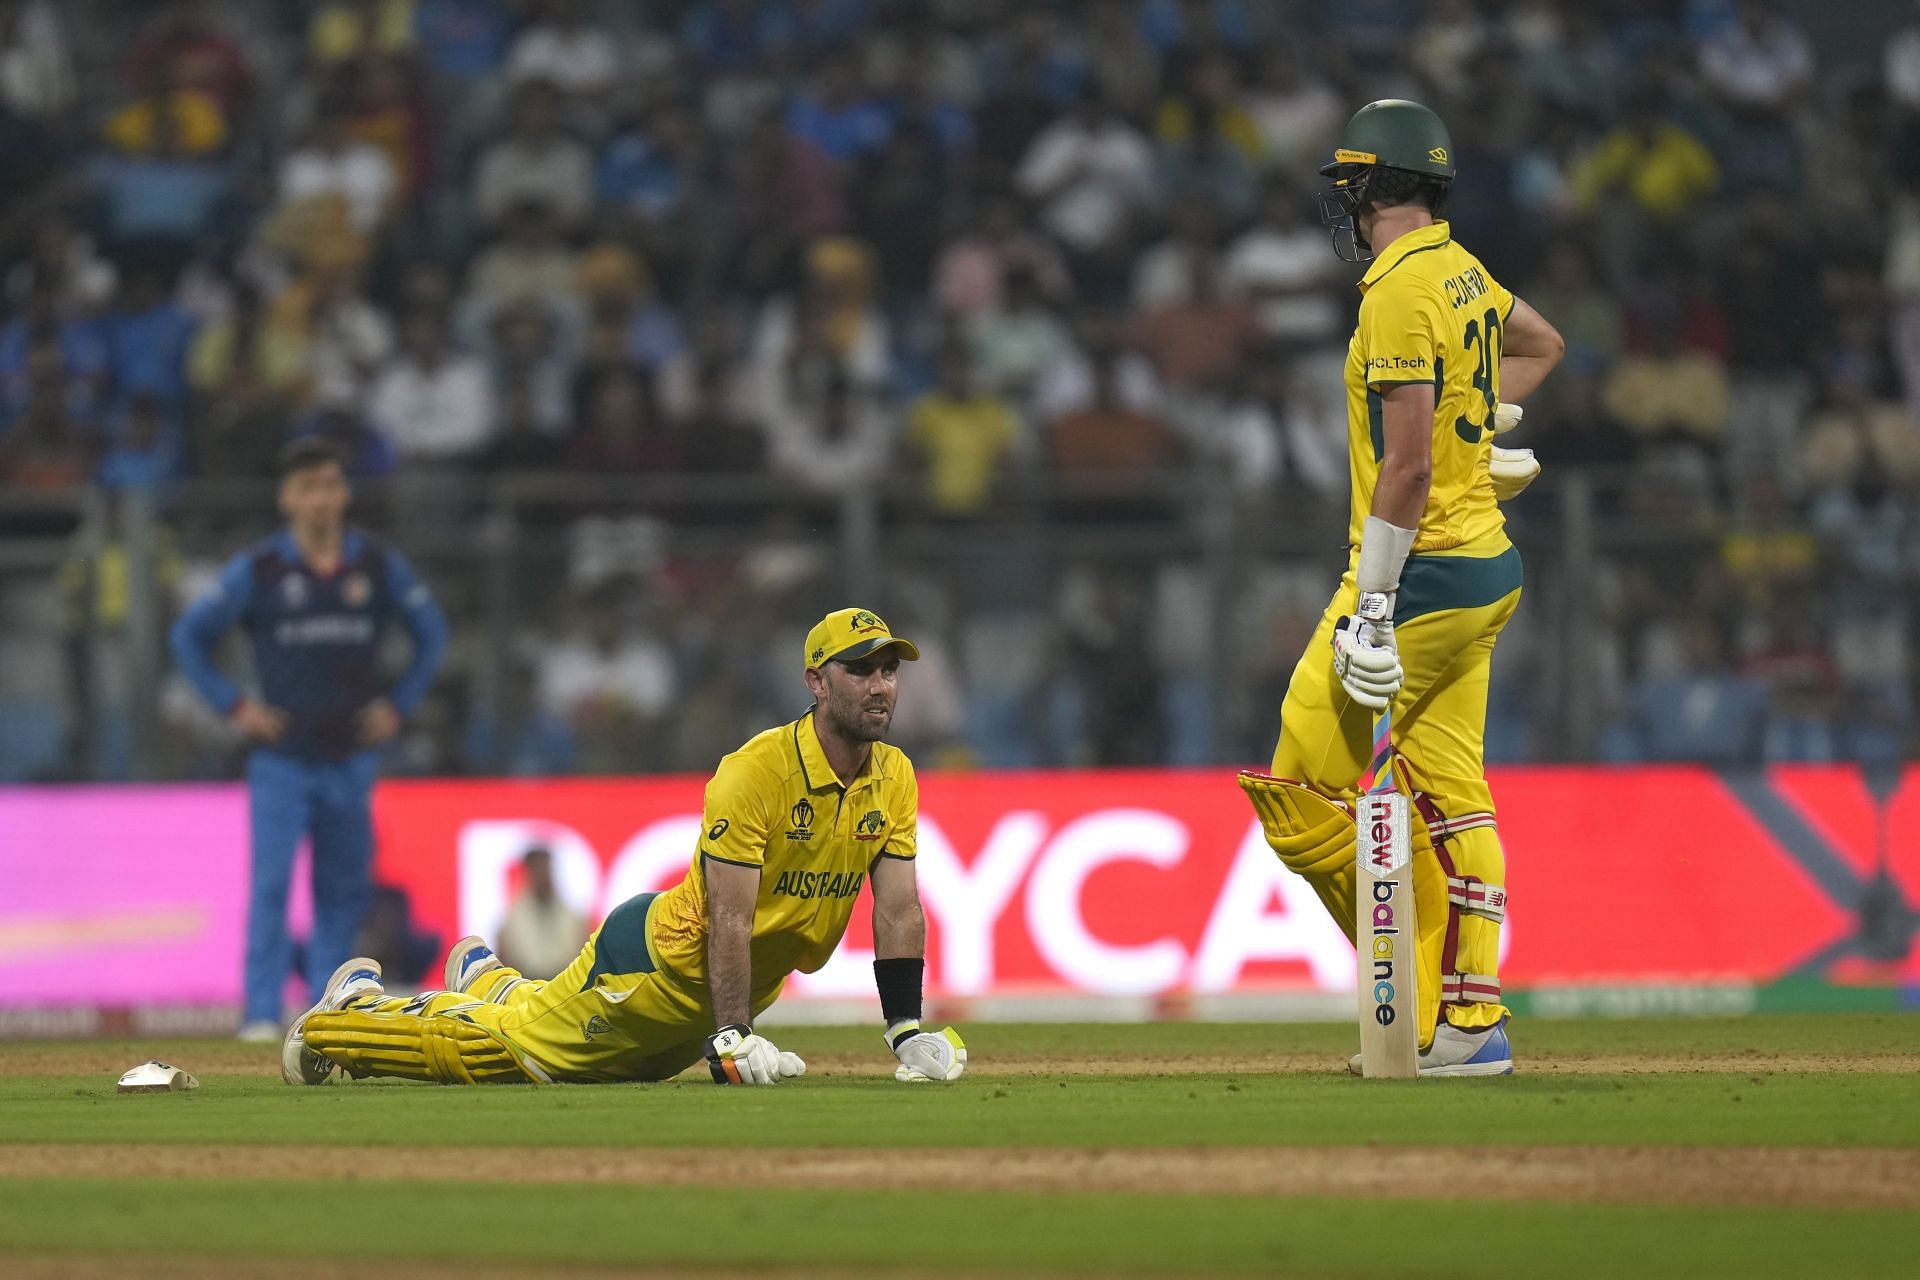 Glenn Maxwell struggled with cramps and was barely able to move his feet. [P/C: AP]